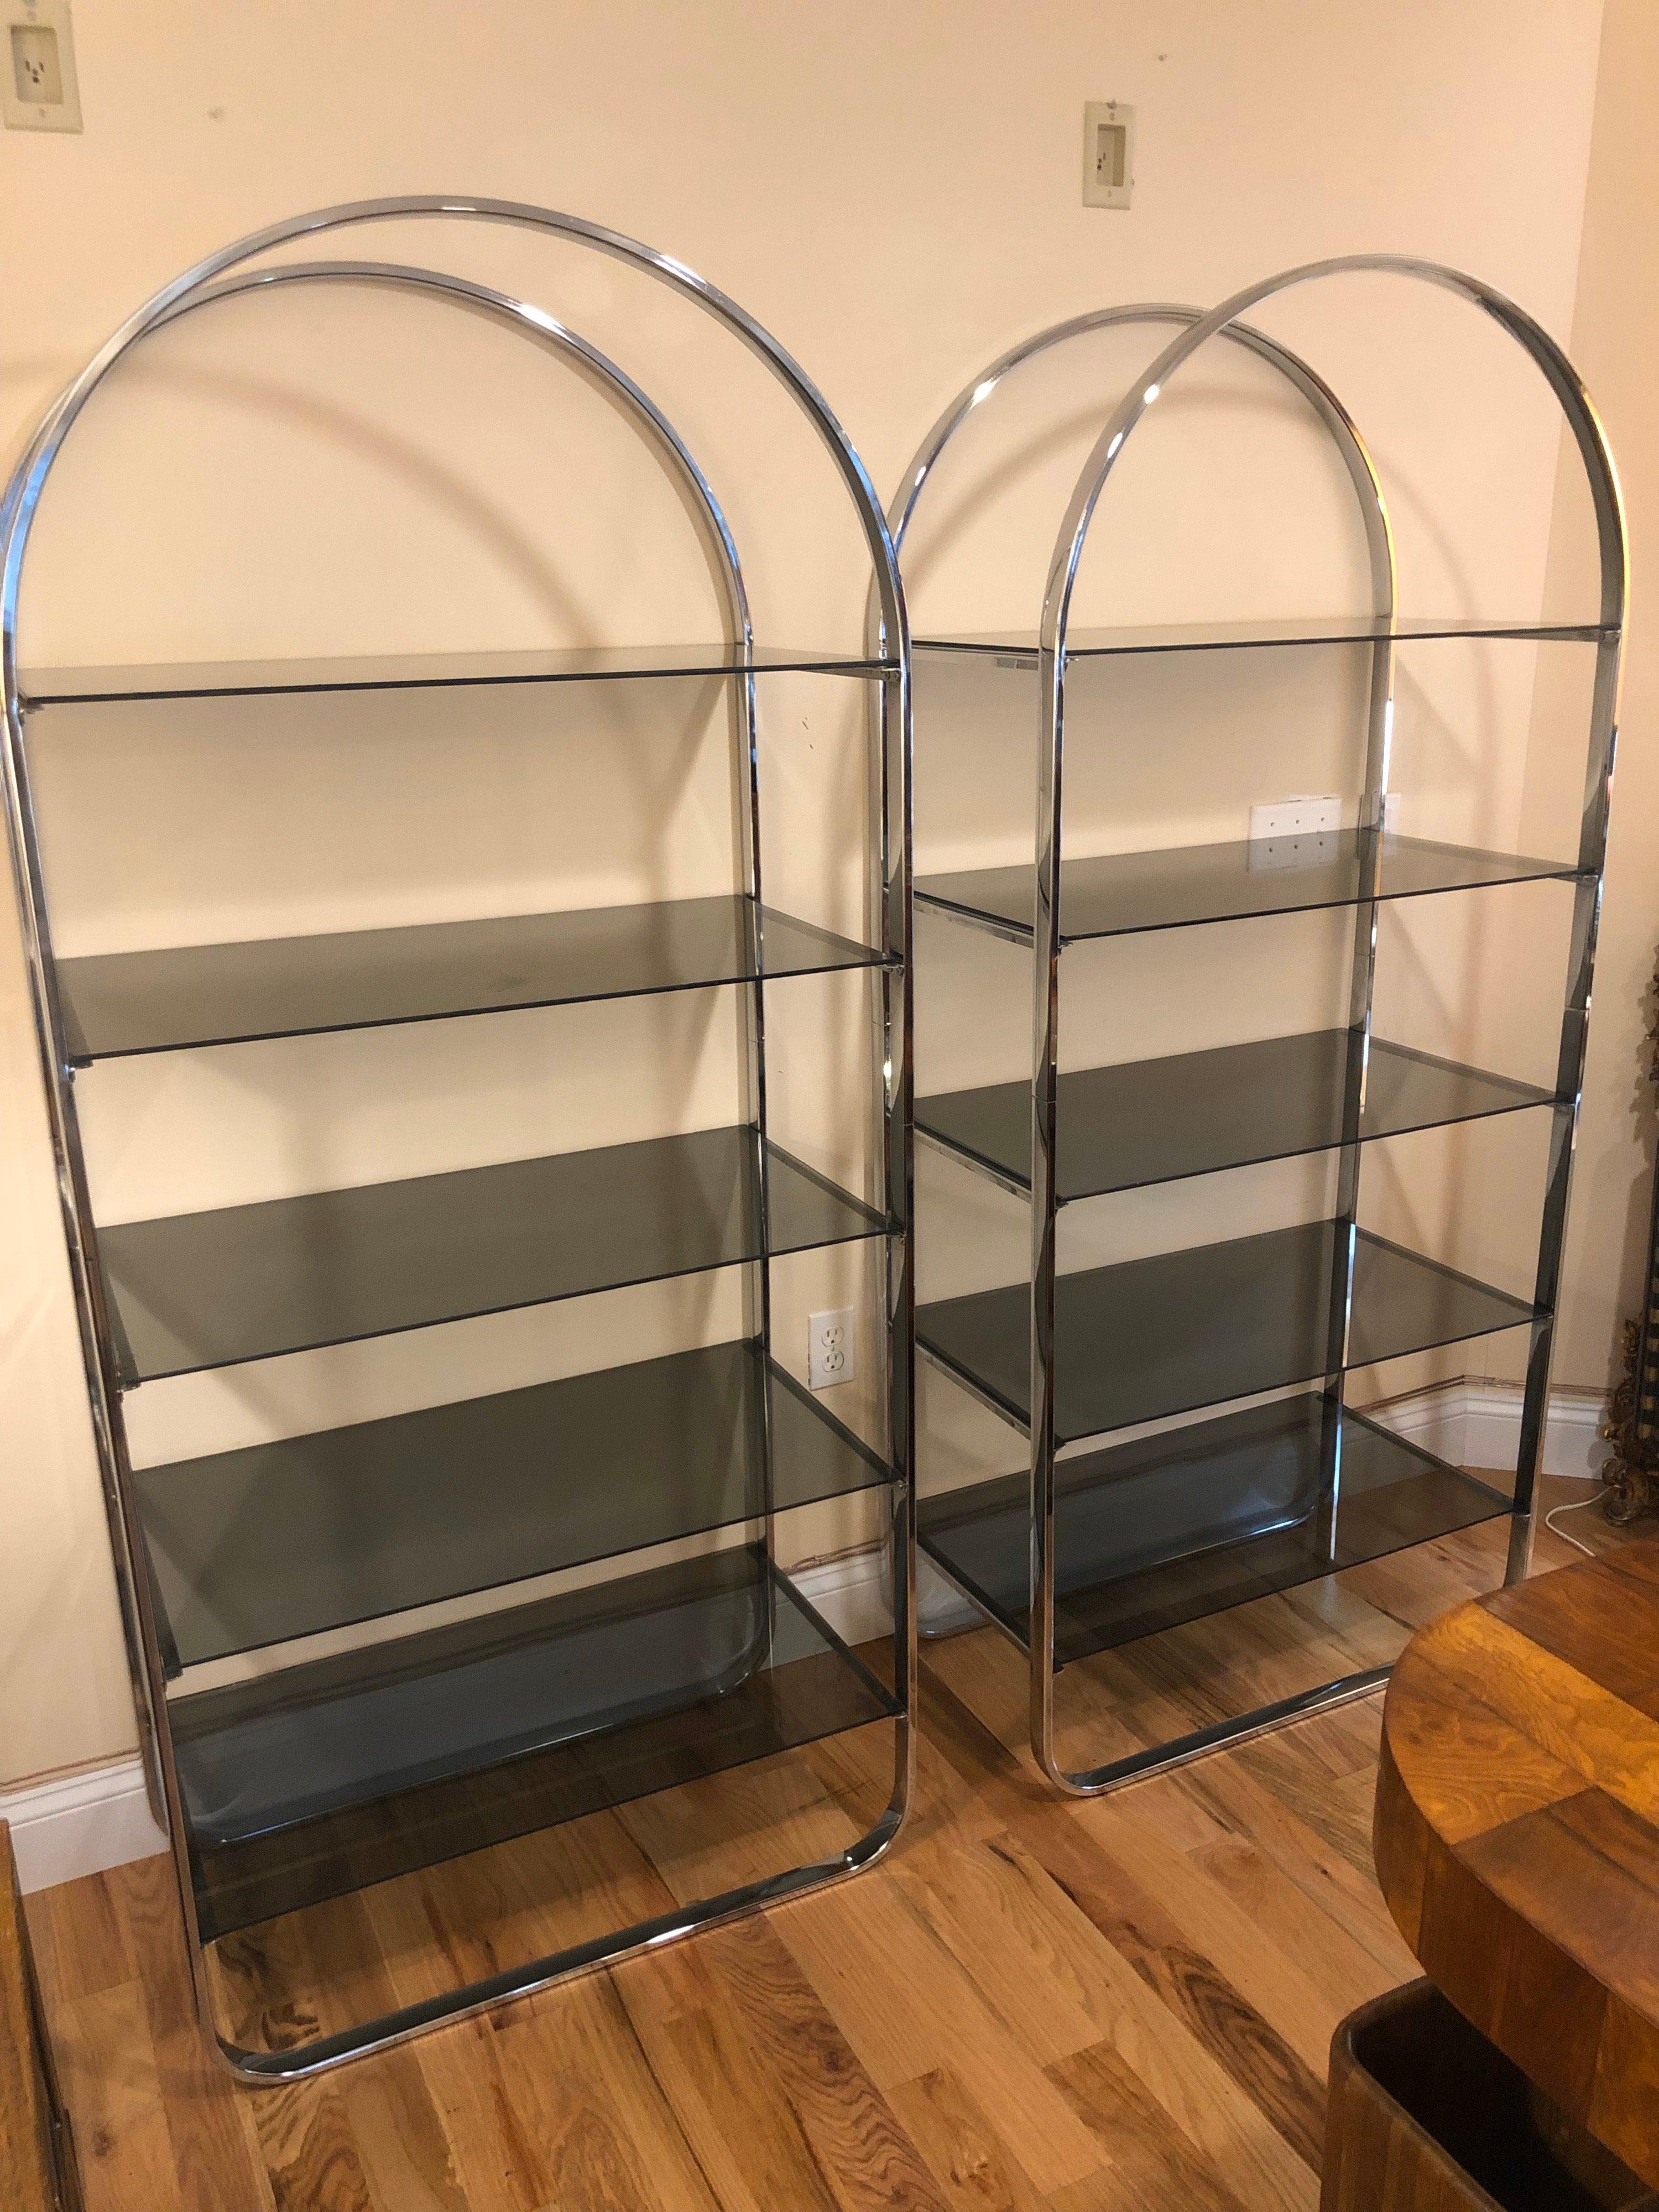 Price is for the pair.
Pair of chrome and smoked glass étagères. Five shelves each or 10 shelves total for display or storage.  Sleek and sexy these would make any room look good. In the style of Milo Baughman. Perfect Minimalist look for office,